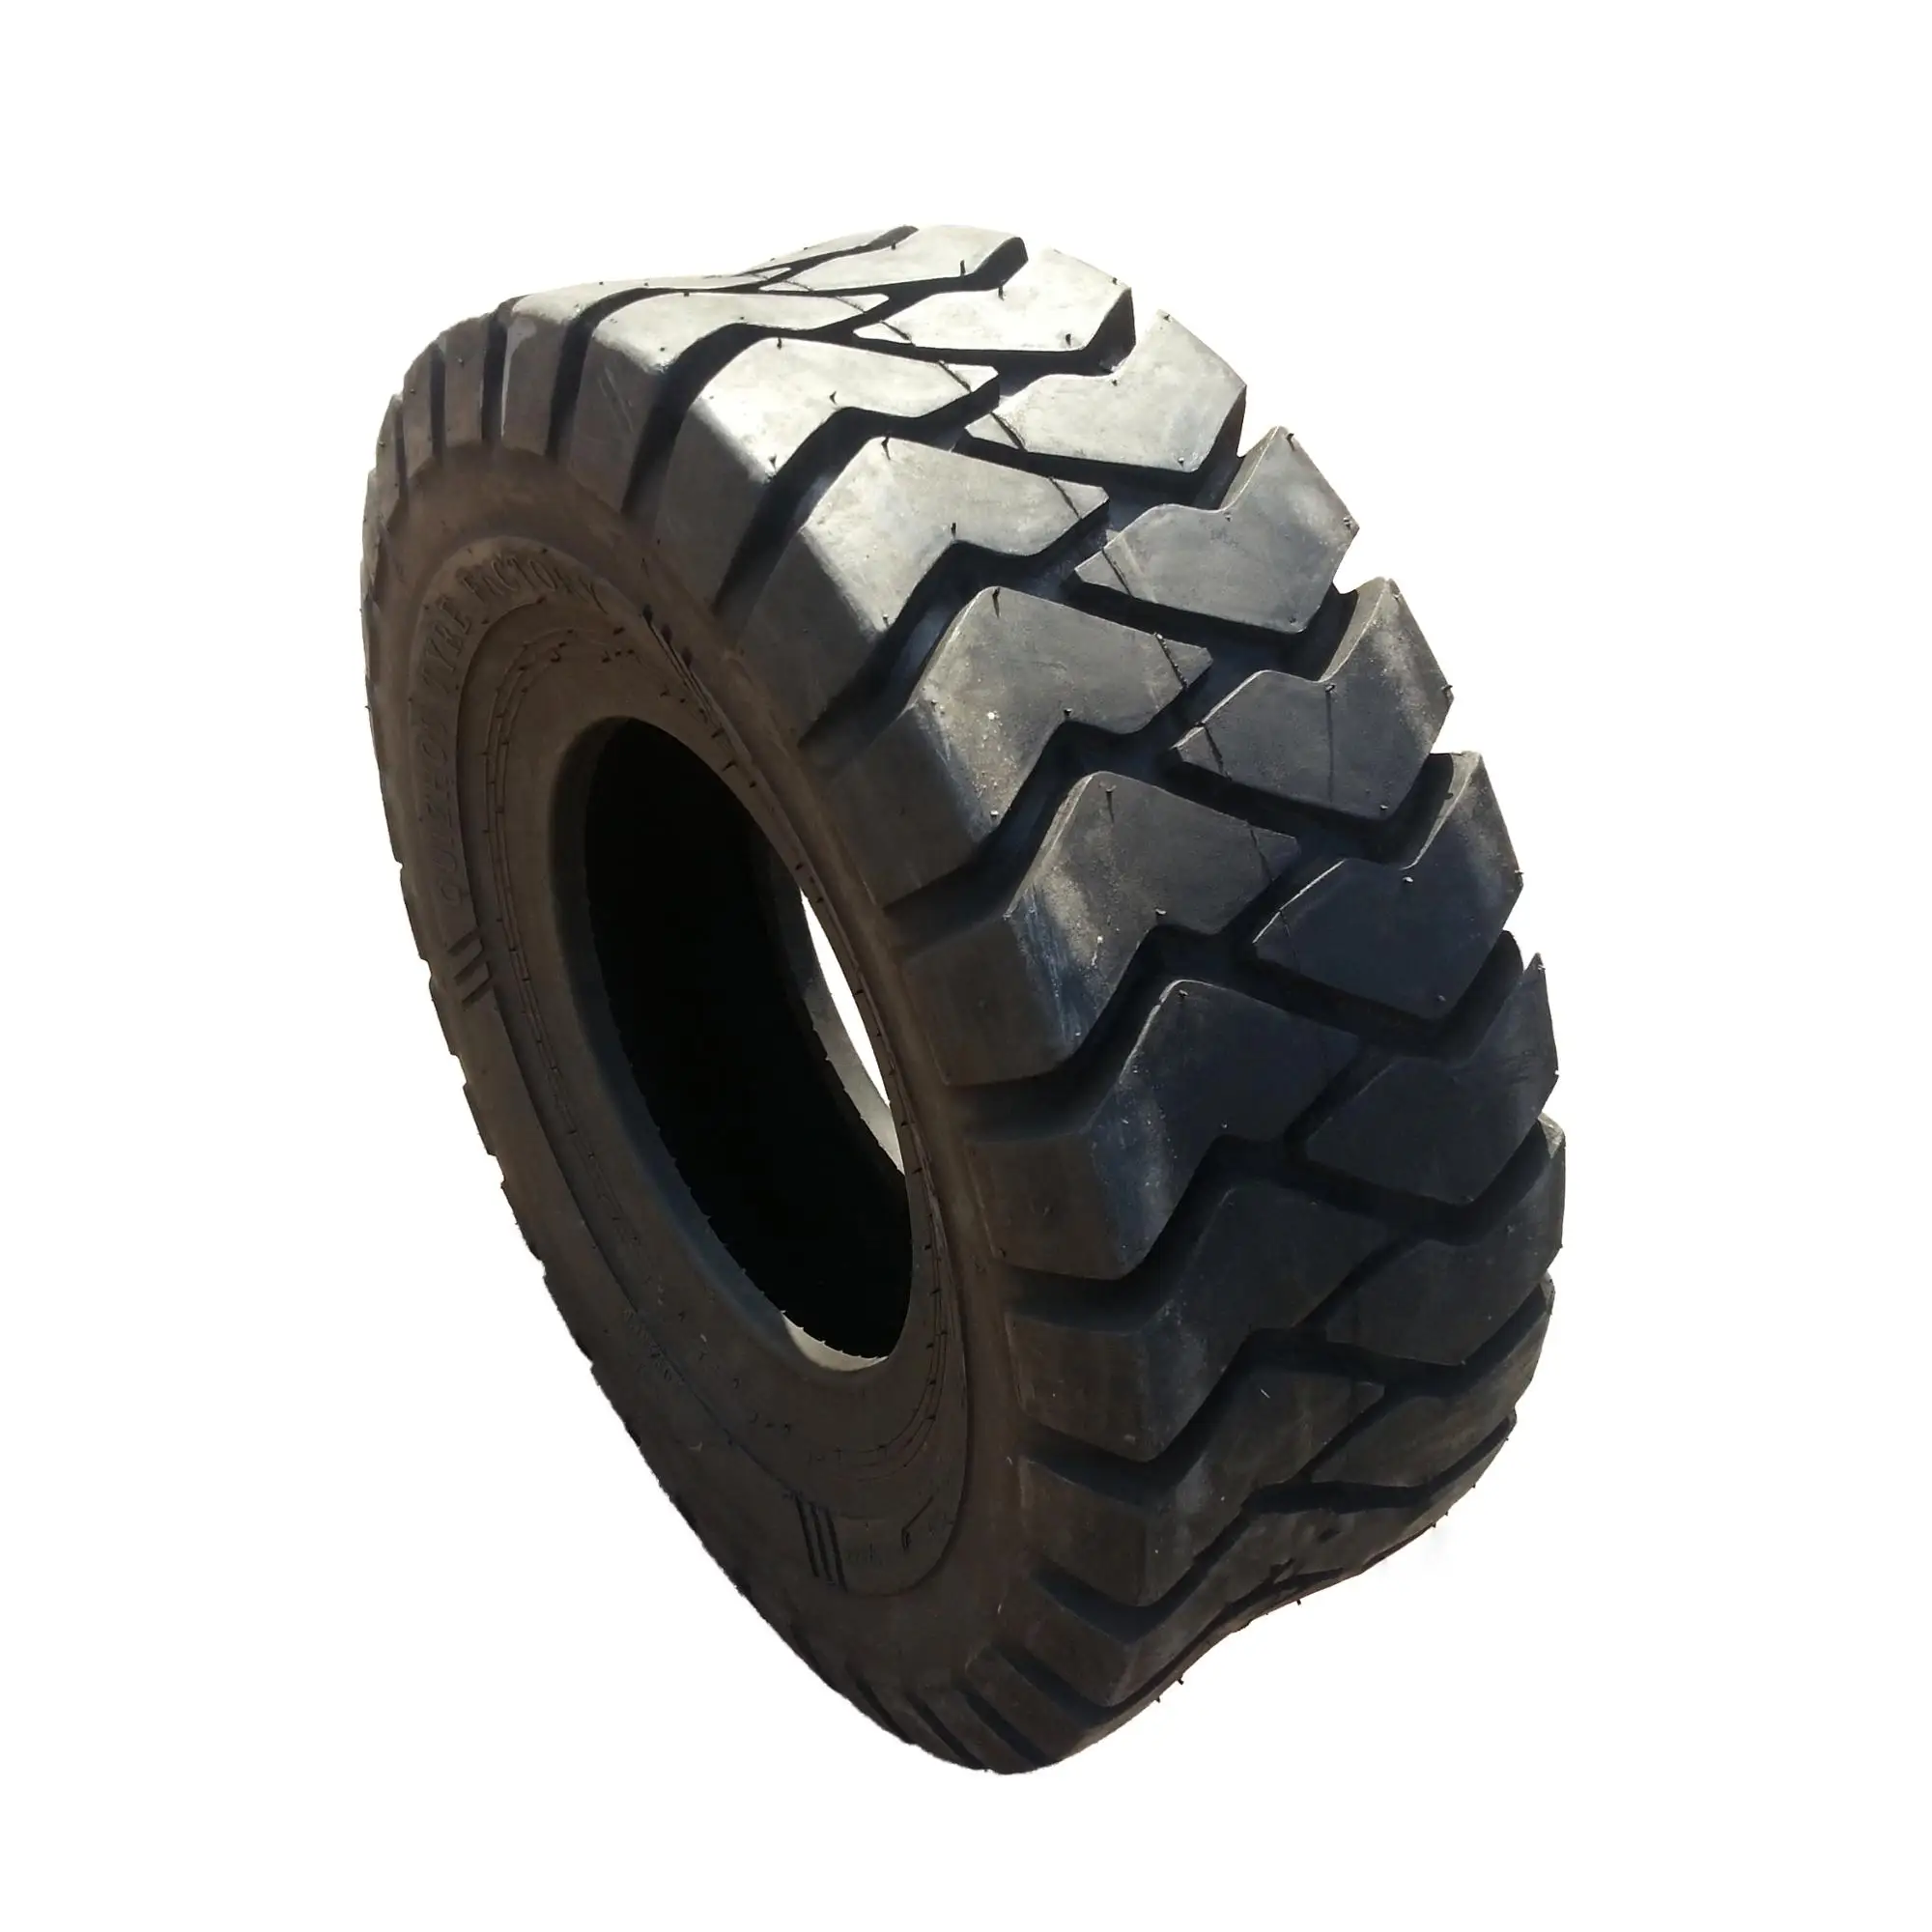 Industrial Tires 27 10 12 Pneumatic Tire Forklift Tyres Buy Industrial New Product Tire 27 10 12 Pneumatic Forklift Tyre Forklift Tyres 27 10 12 Product On Alibaba Com